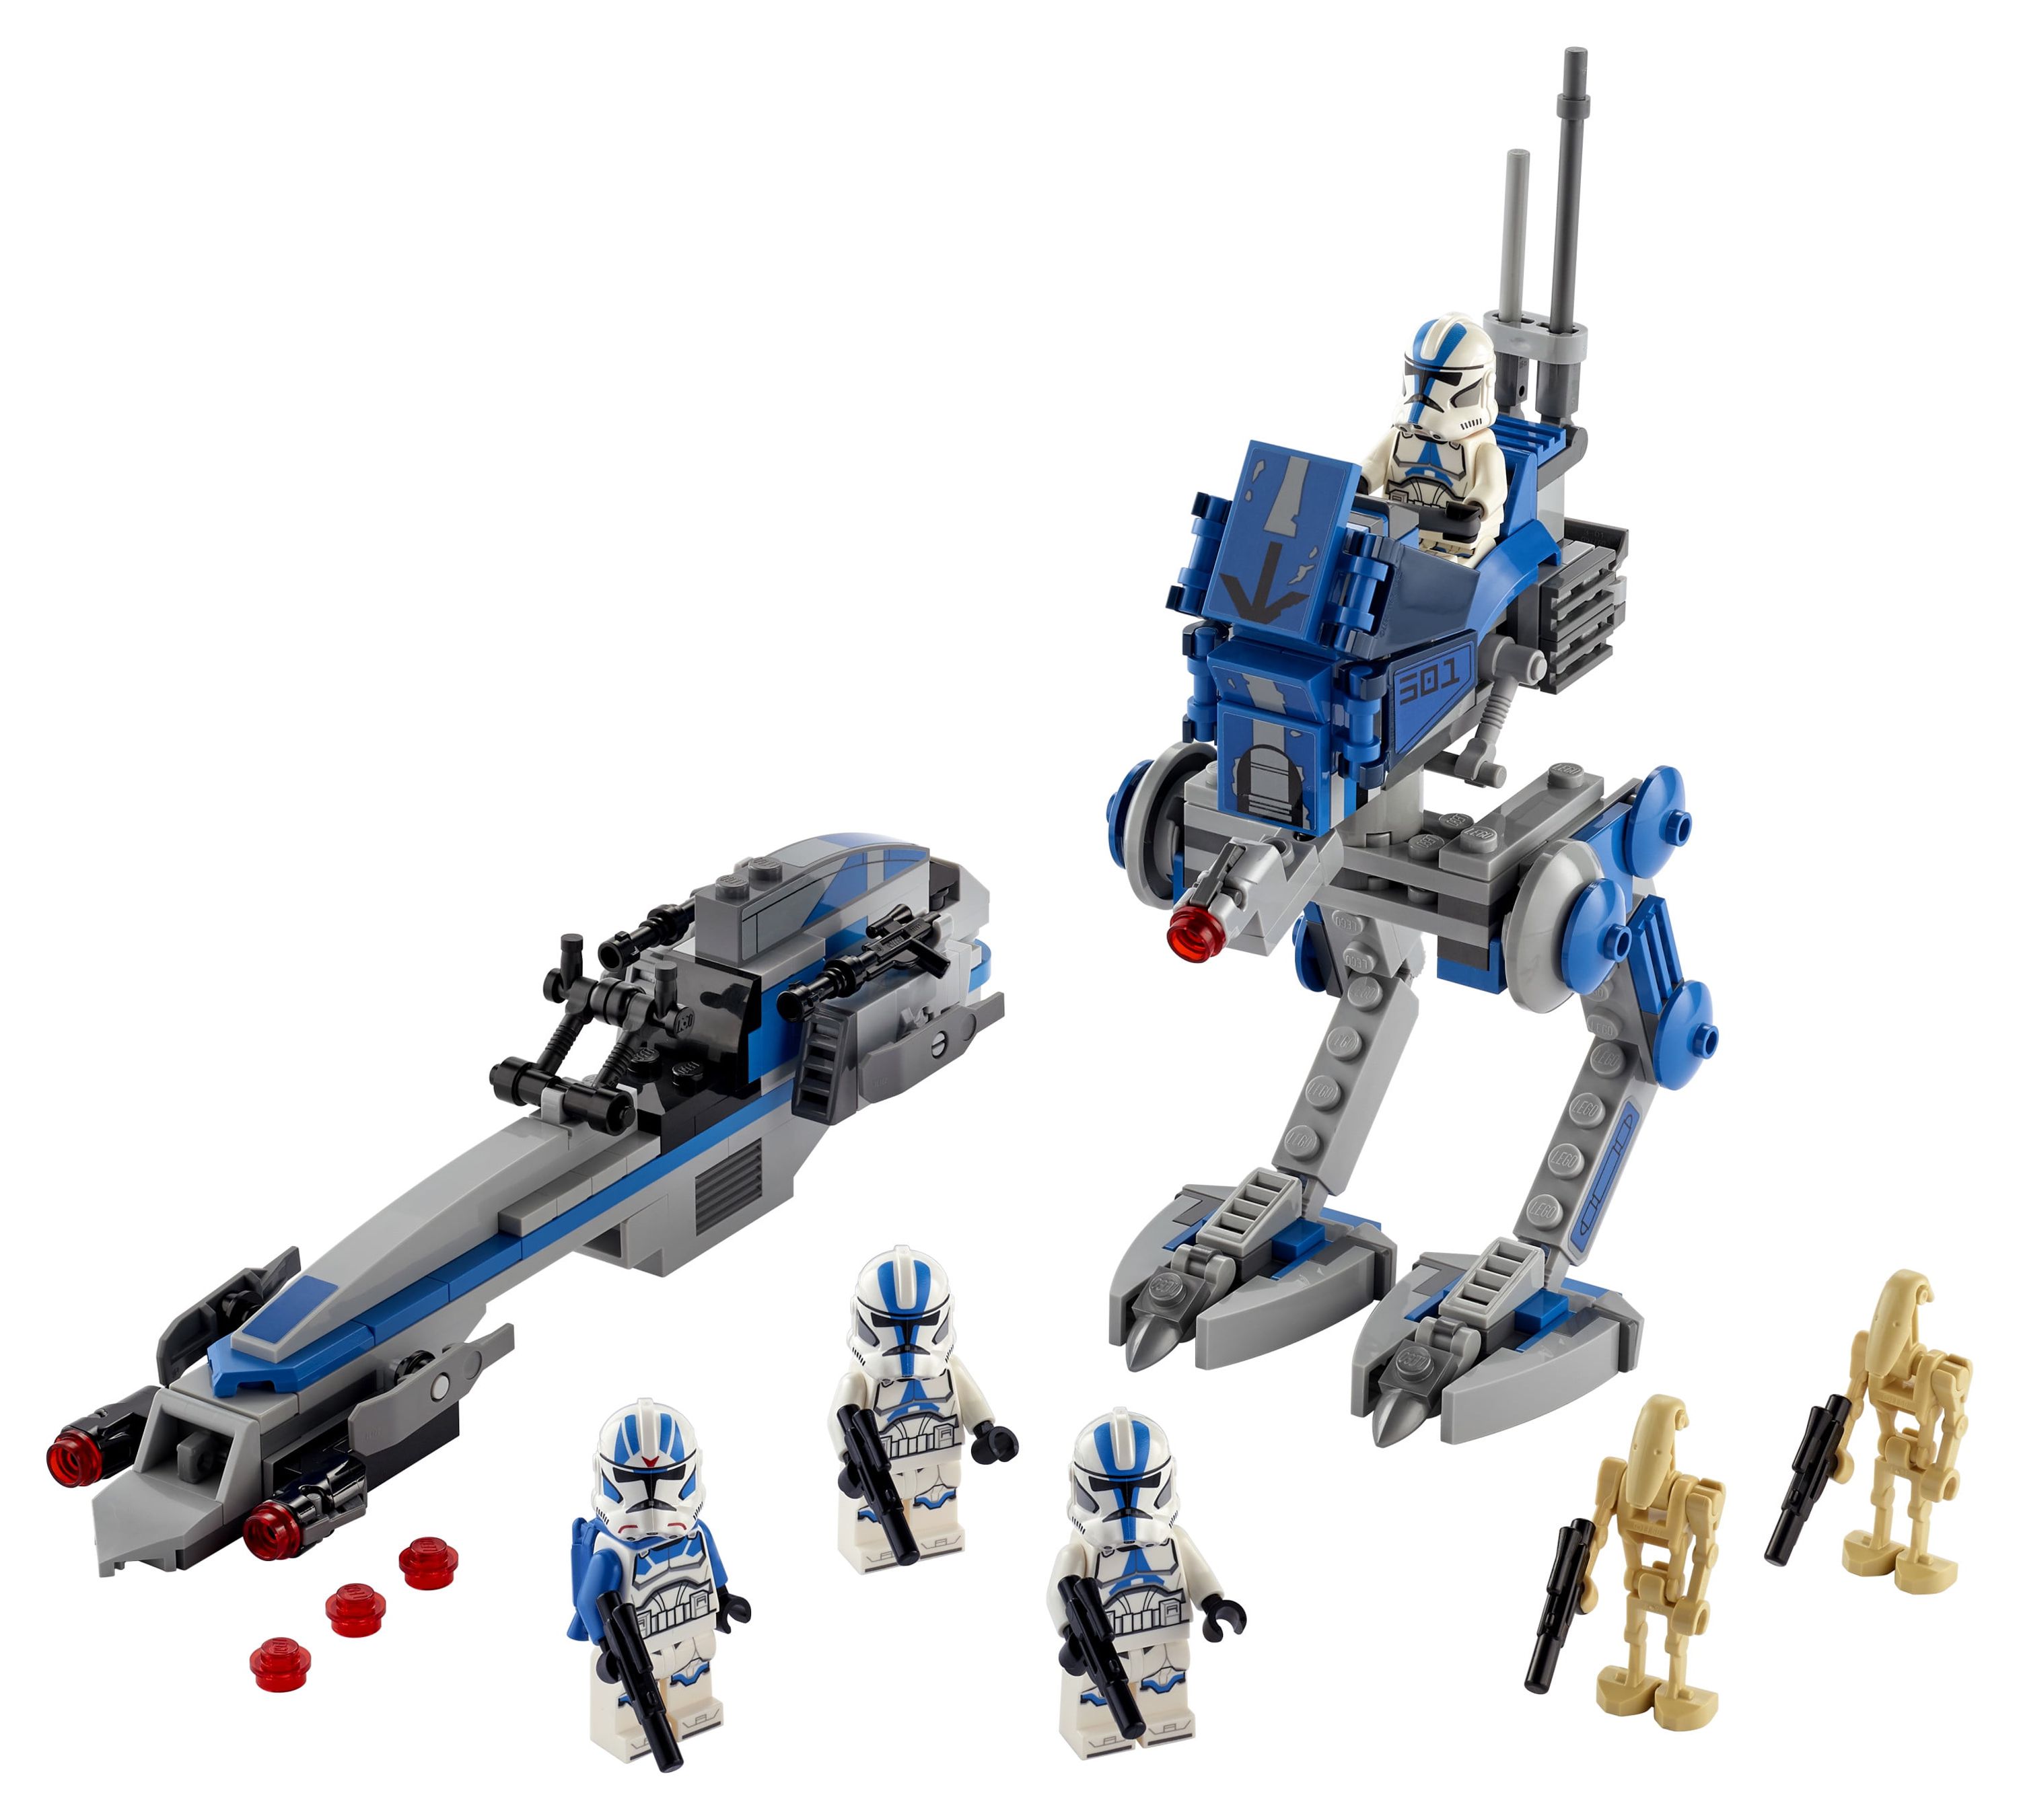 LEGO Star Wars 501st Legion Clone Troopers 75280 Building Toy, Cool Action Set for Creative Play (285 Pieces) - image 3 of 7